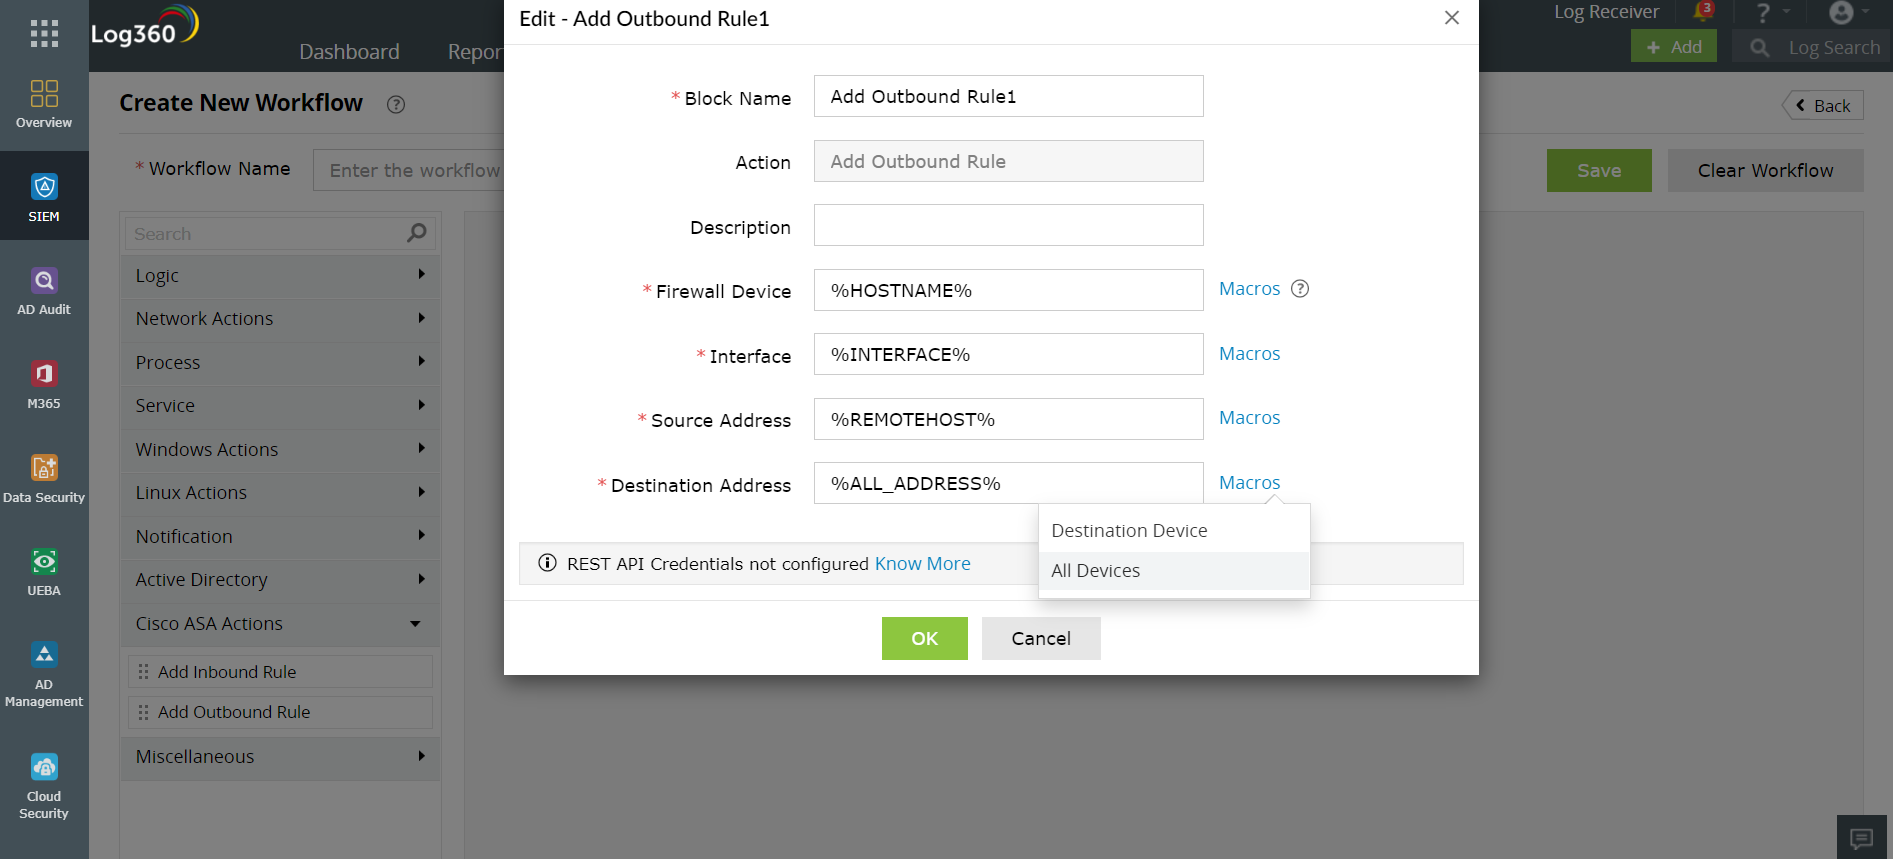 Configuring outbound rules using Log360